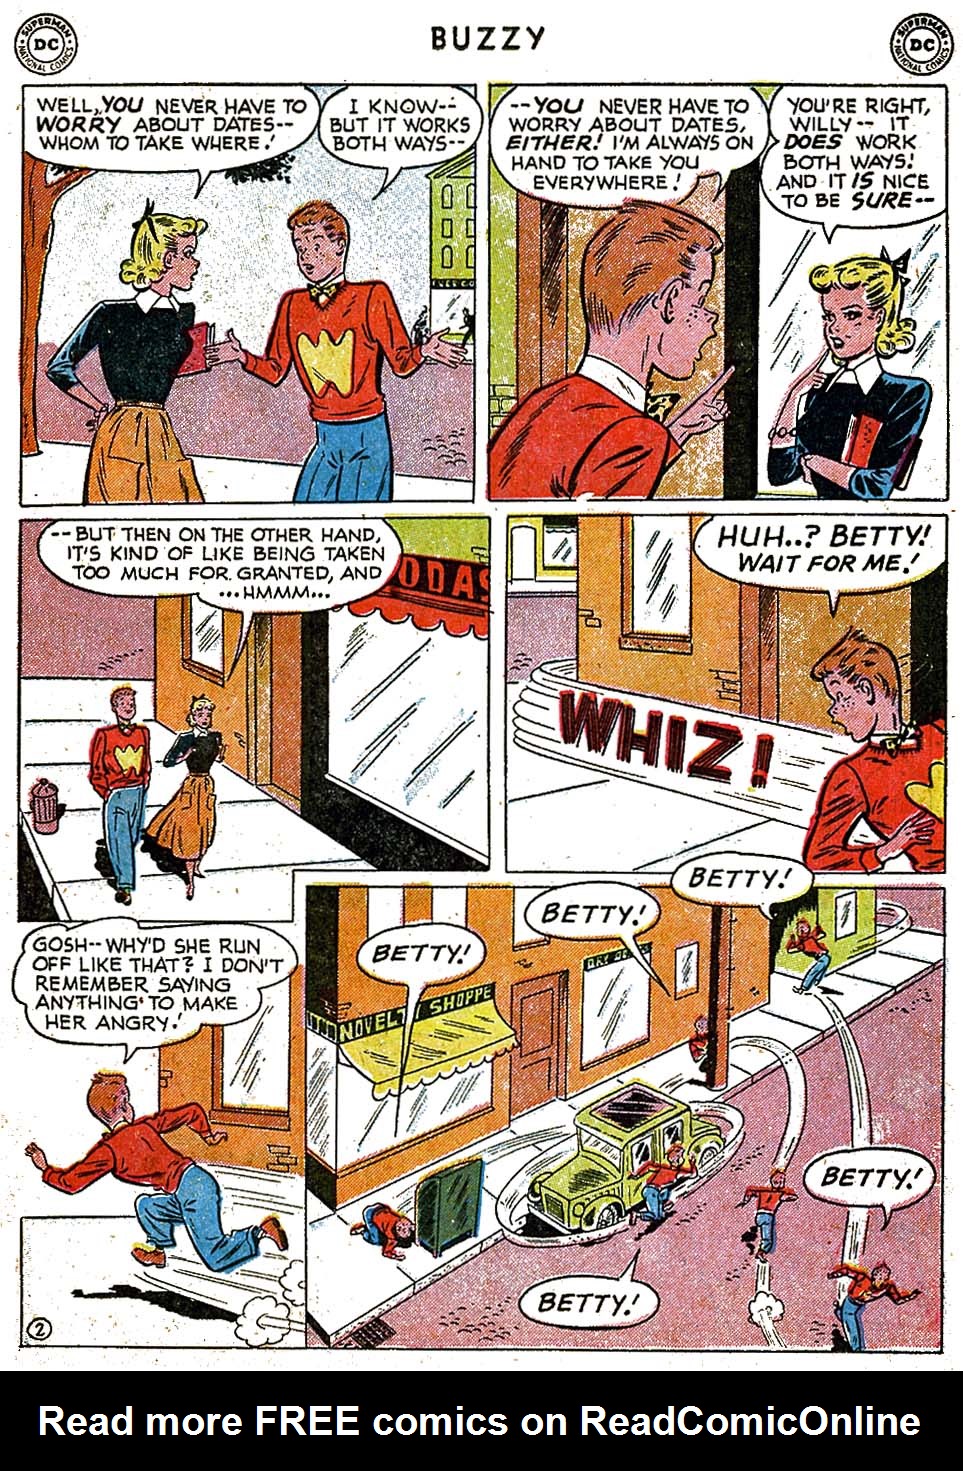 Read online Buzzy comic -  Issue #38 - 29